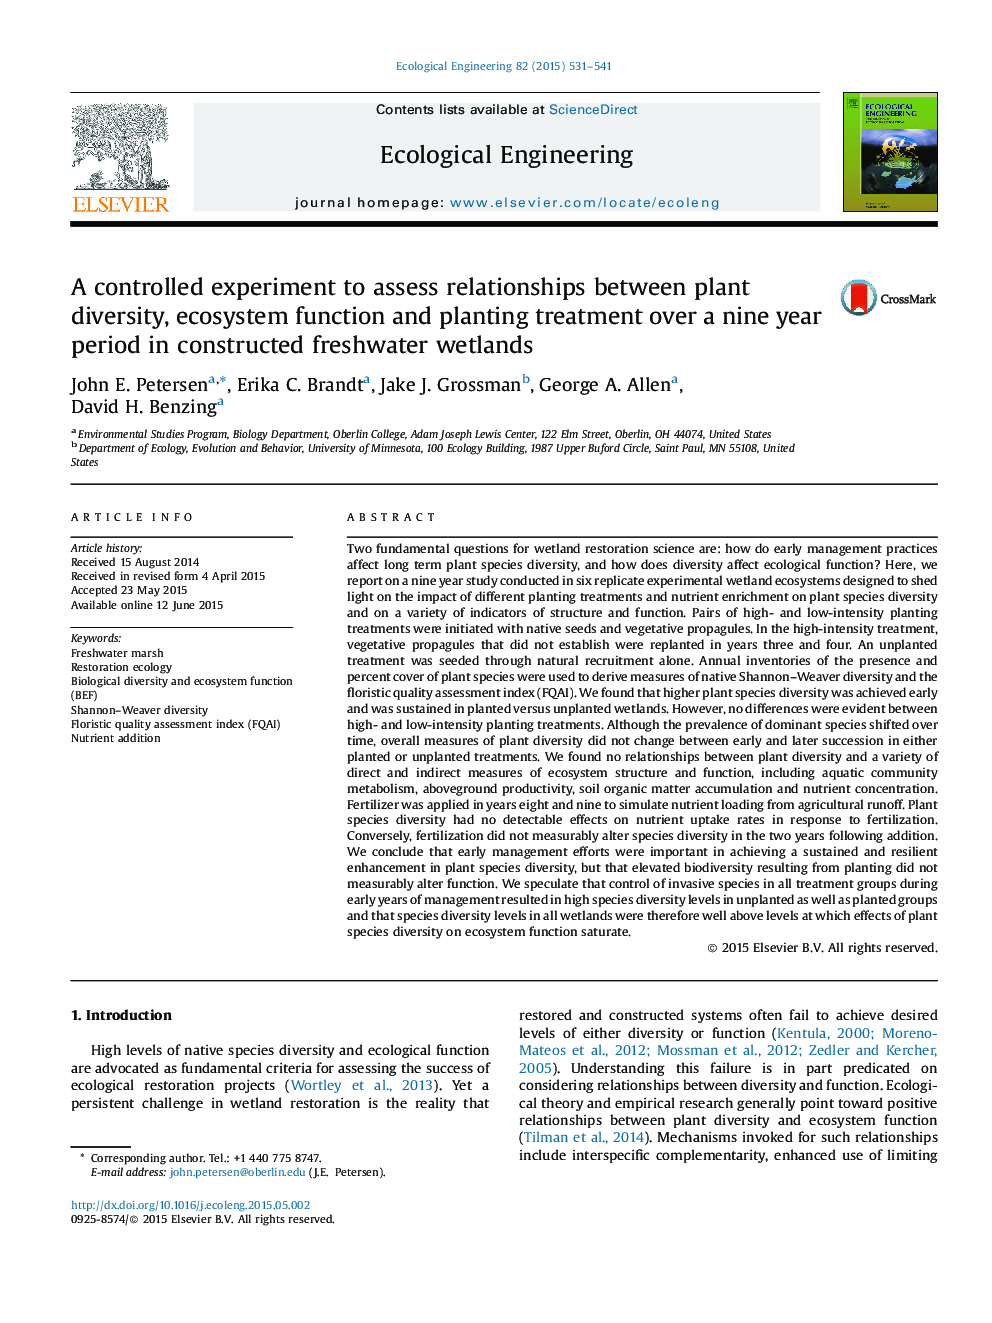 A controlled experiment to assess relationships between plant diversity, ecosystem function and planting treatment over a nine year period in constructed freshwater wetlands